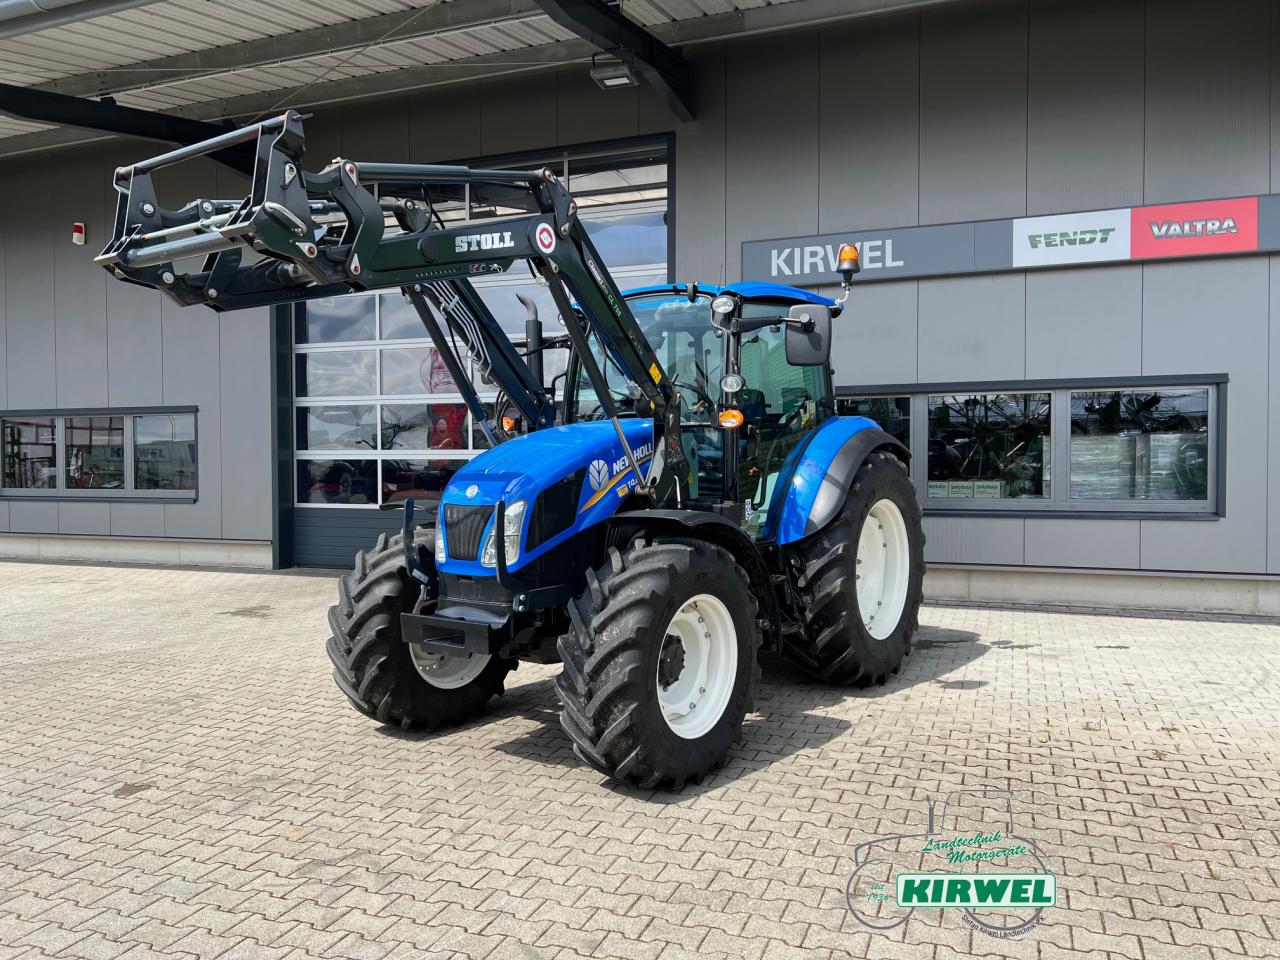 New Holland T4.85 DC